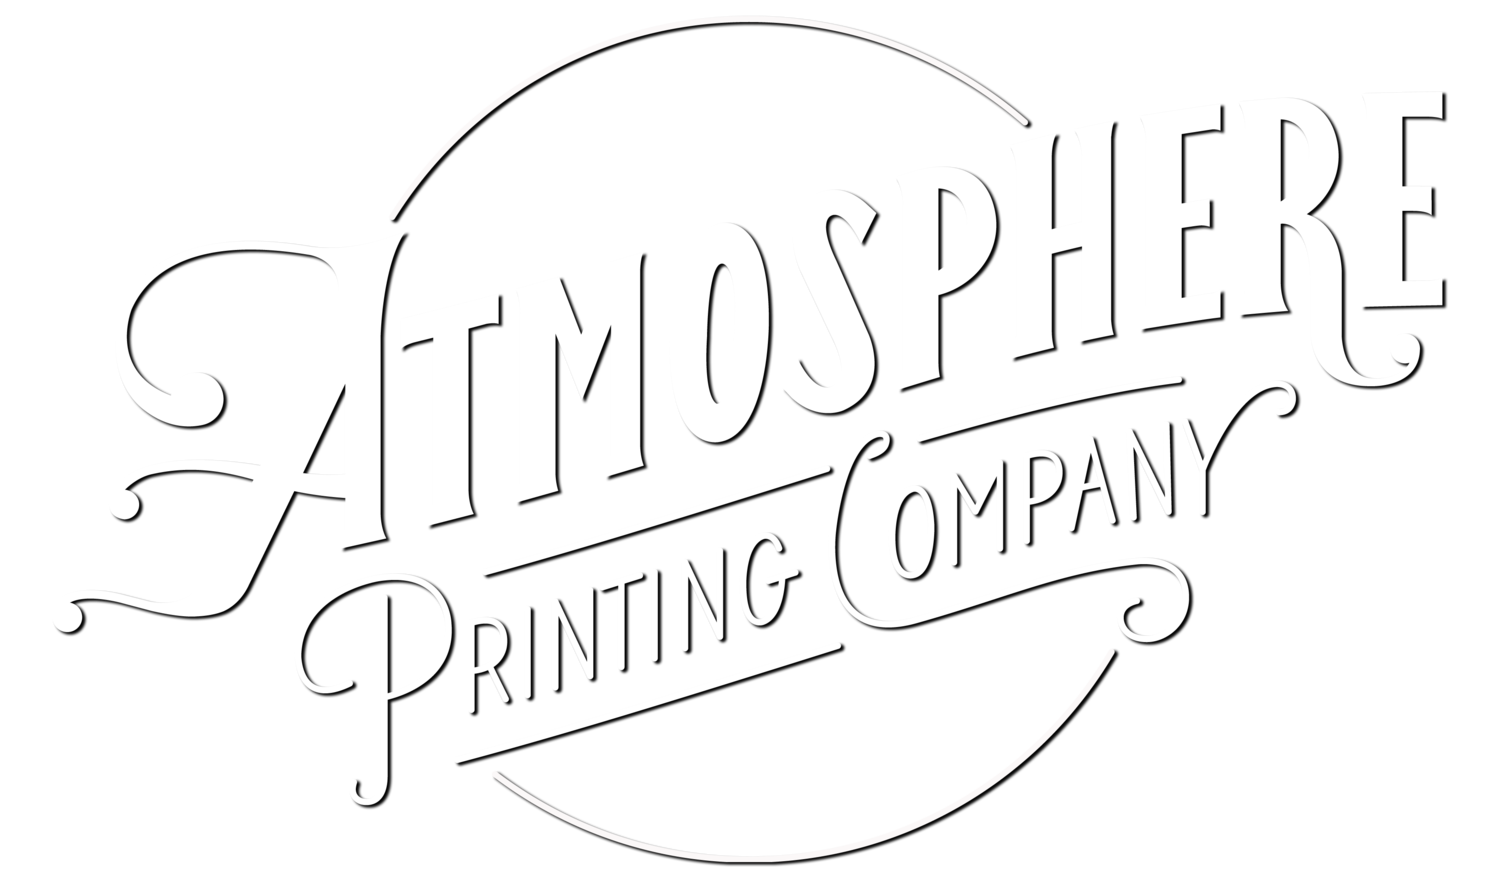 antenne specifikation Følg os Atmosphere Printing Company